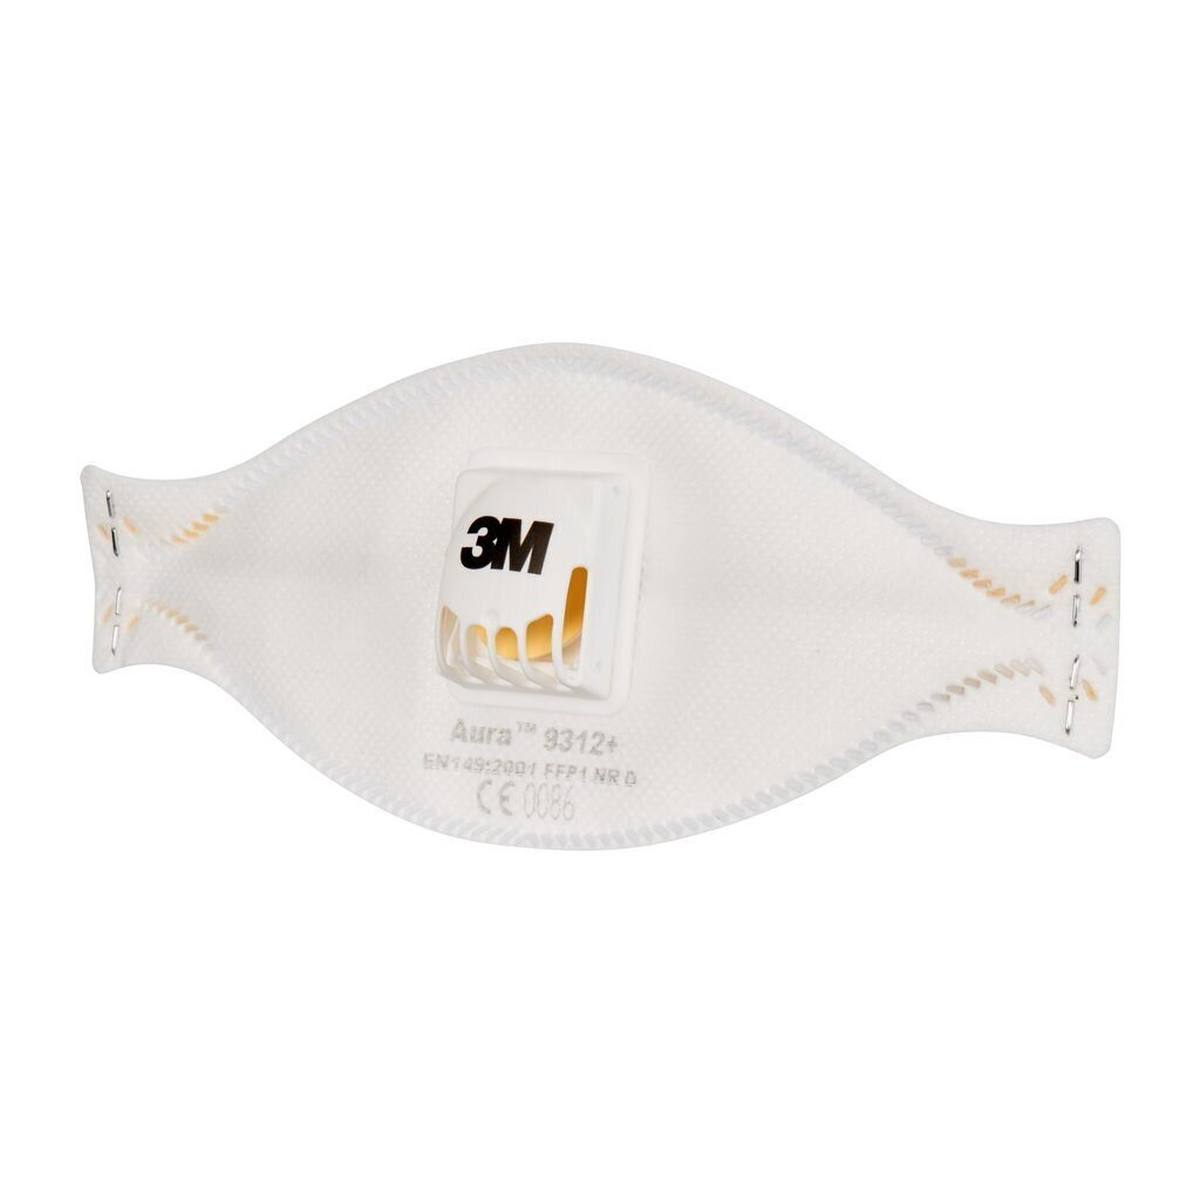 3M 9312+ Aura respirator FFP1 with cool-flow exhalation valve, up to 4 times the limit value (hygienically individually packaged)